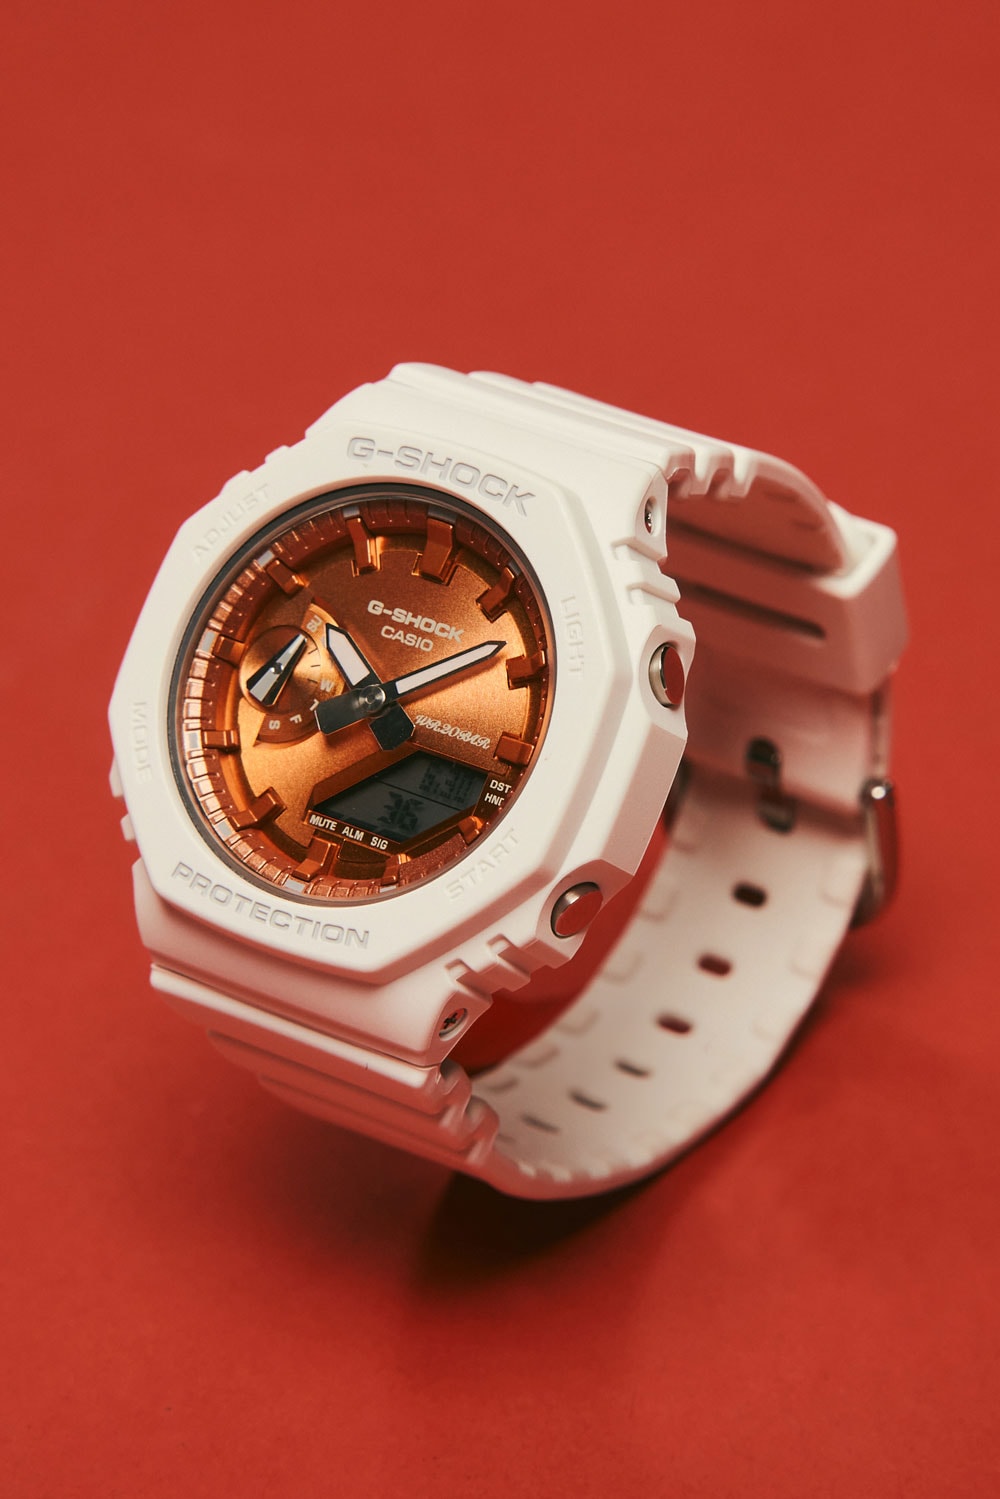 g-shock GM-S2100WS-7A GMA-S2100WS-7A timepieces watches series wristwatches timepieces metallic models analog blue pink orange green purple sizes